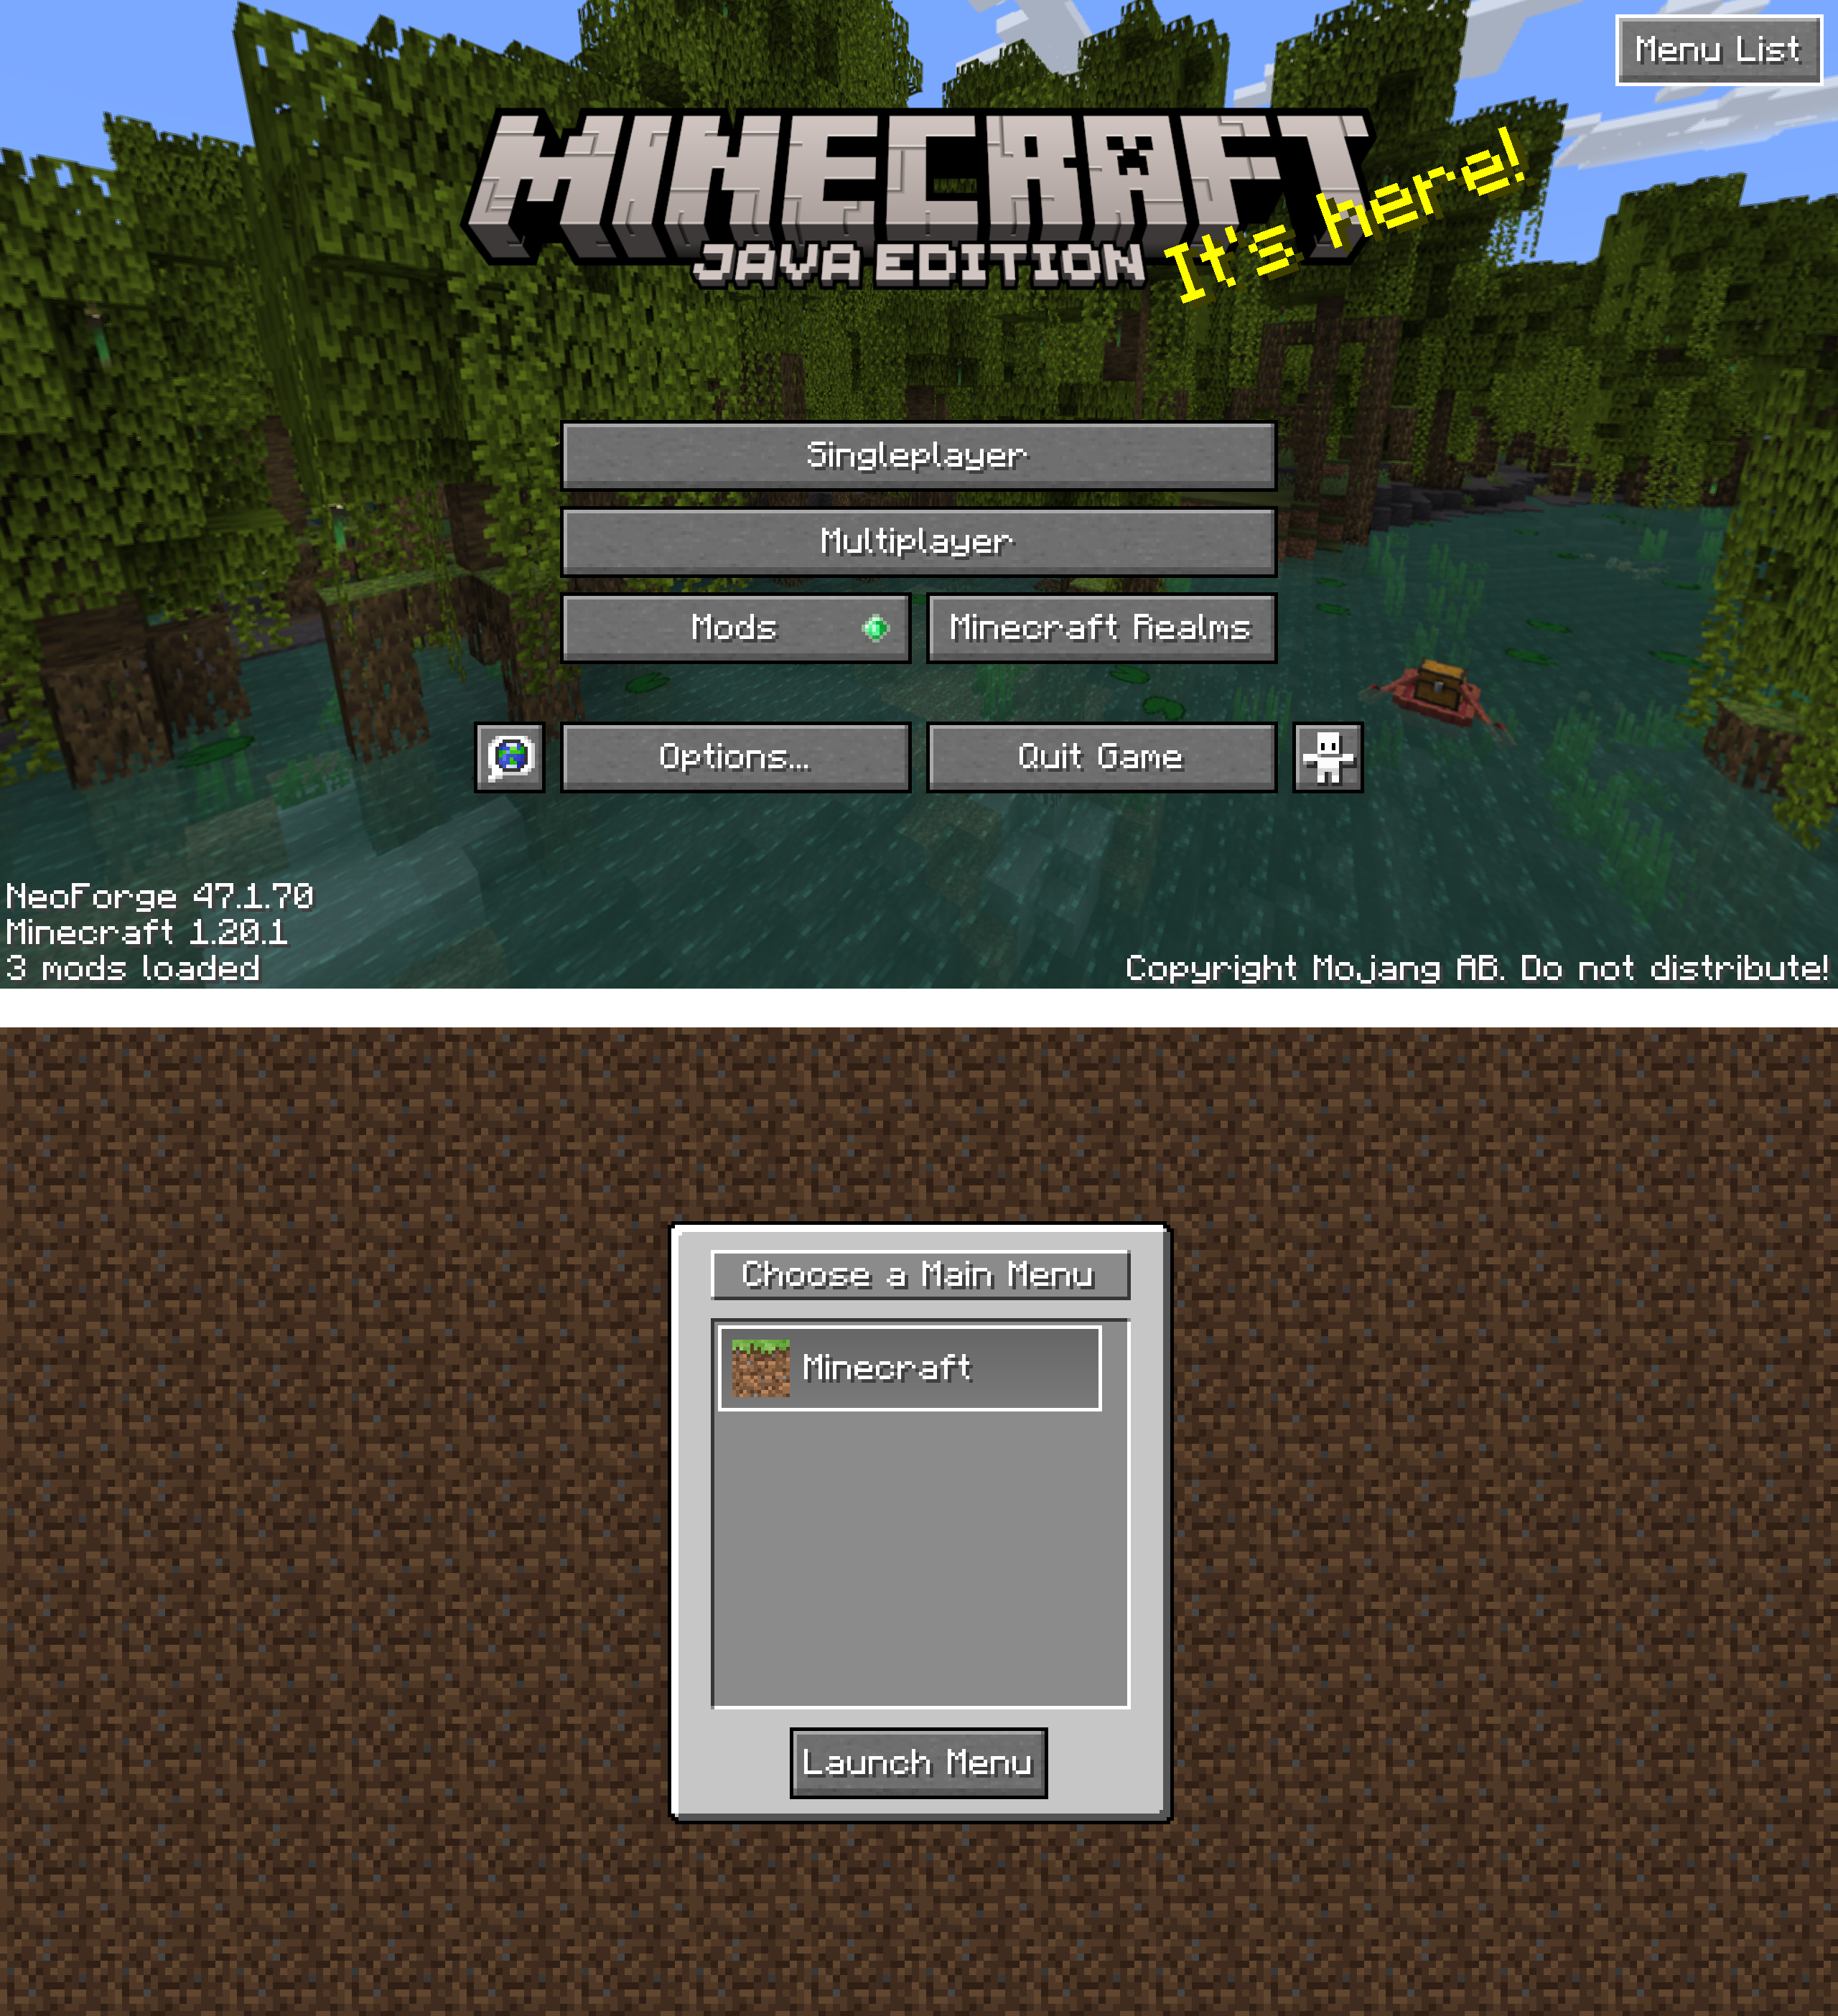 1.0.0] AETHER - V1.04_01 Launch Bug Fixed - BUG FIXES - Crystal Trees,  Enchanted Grass, White Apples! - Minecraft Mods - Mapping and Modding: Java  Edition - Minecraft Forum - Minecraft Forum